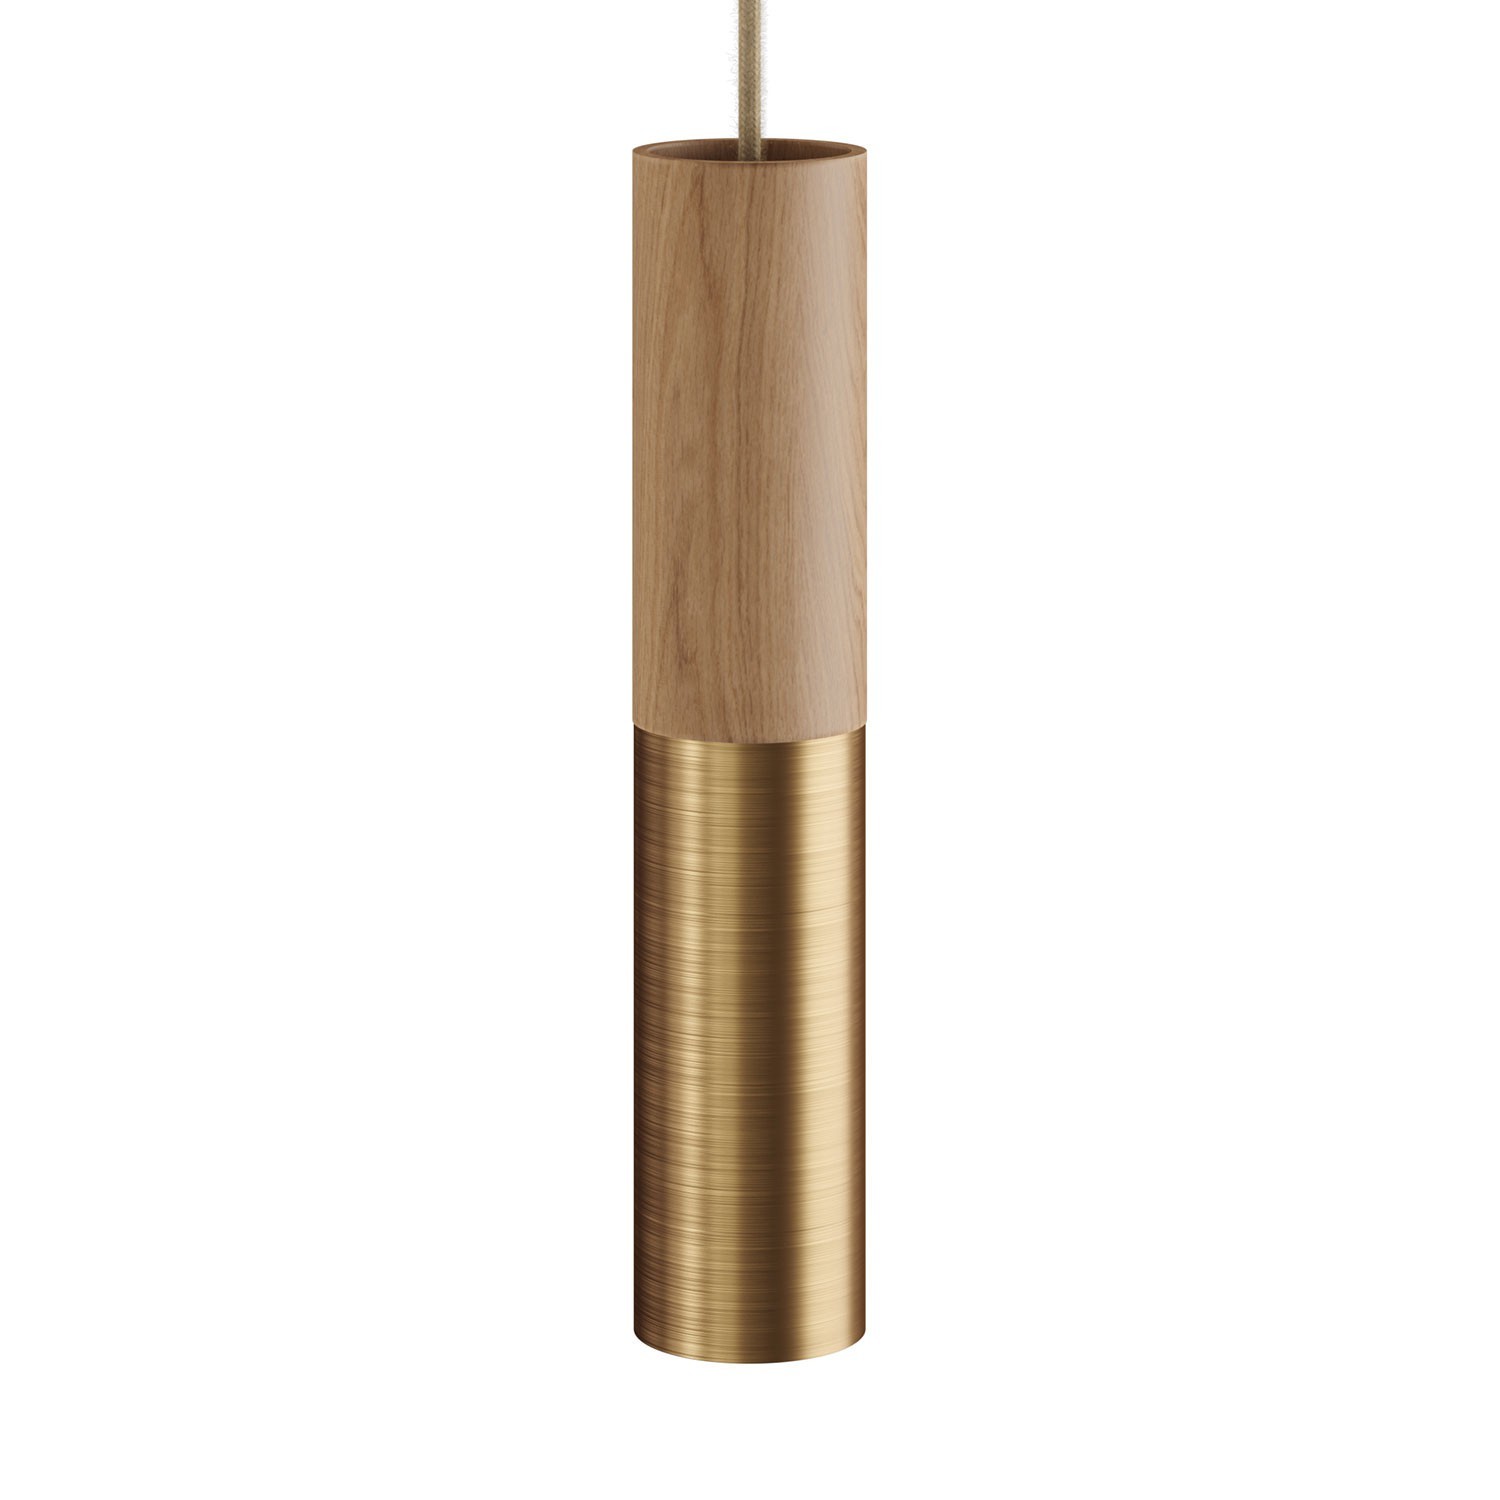 Tub-E14, wood and metal tube for spotlight with E14 double ring lamp holder